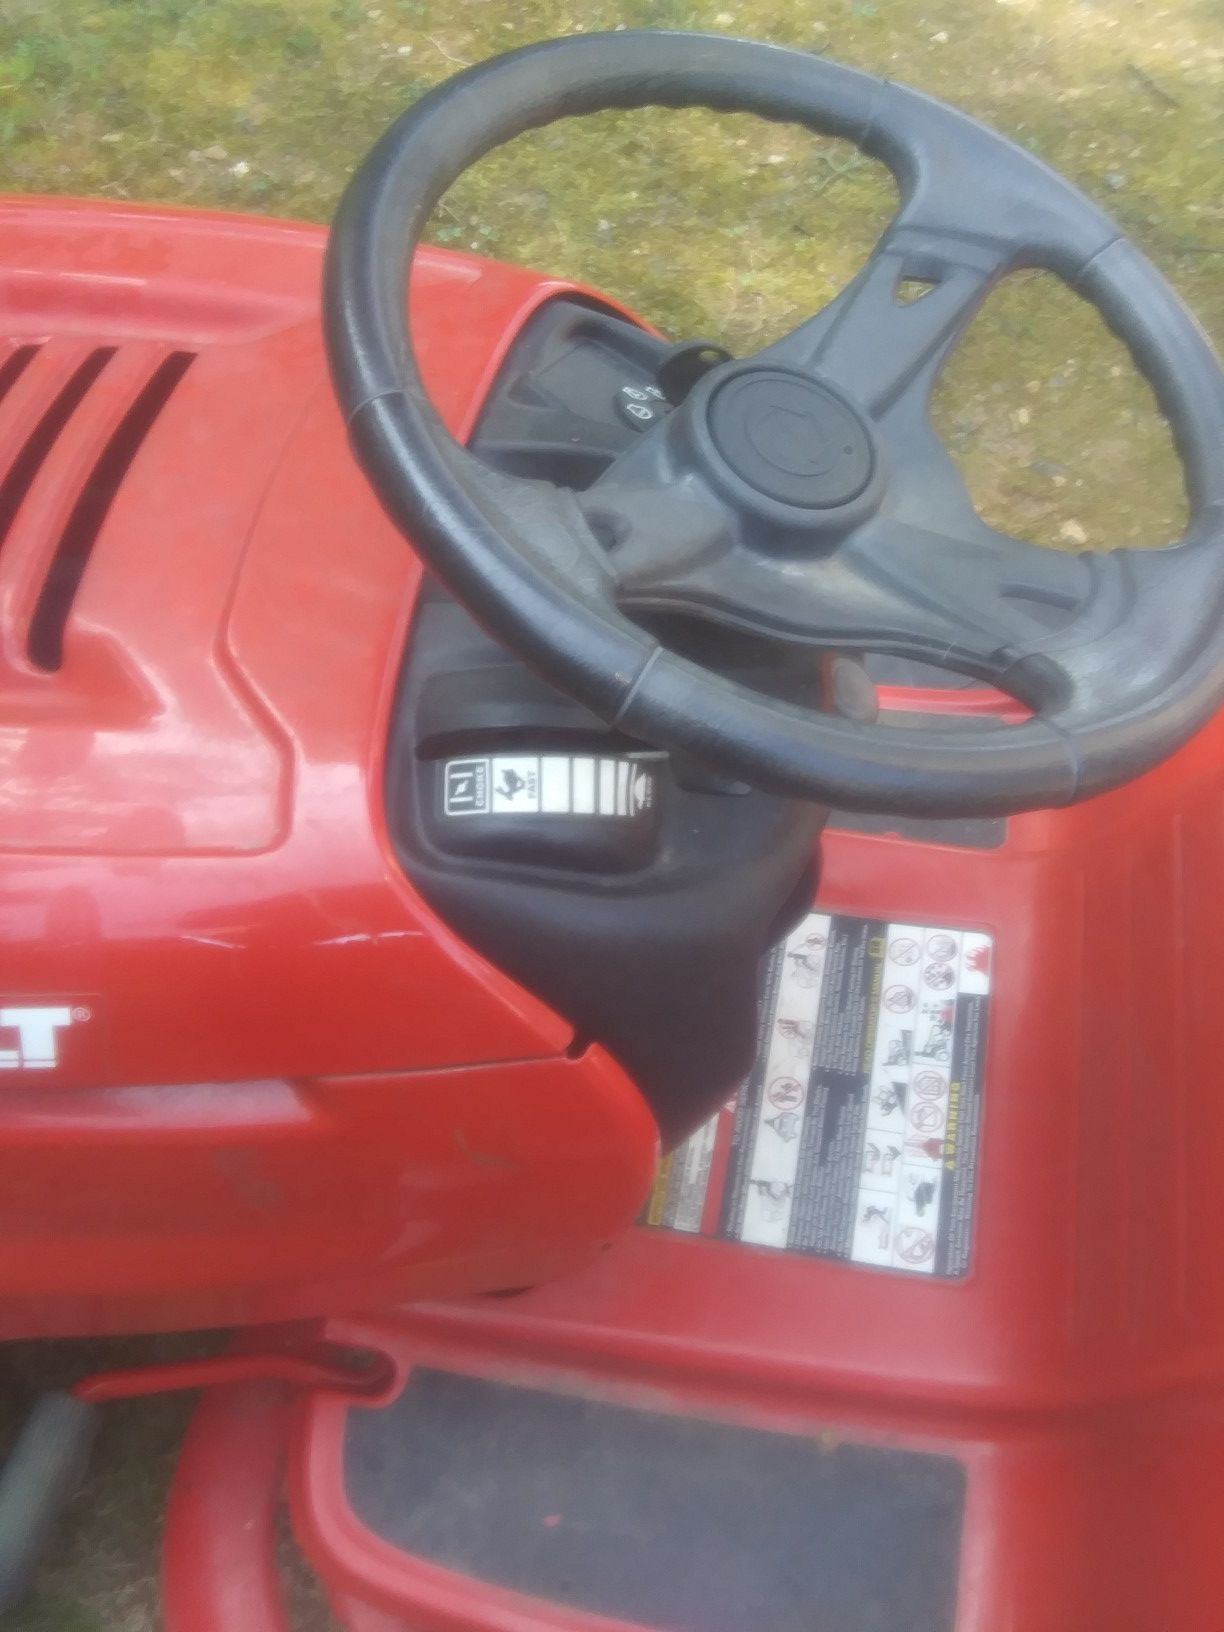 7 speed pony lawn tractor